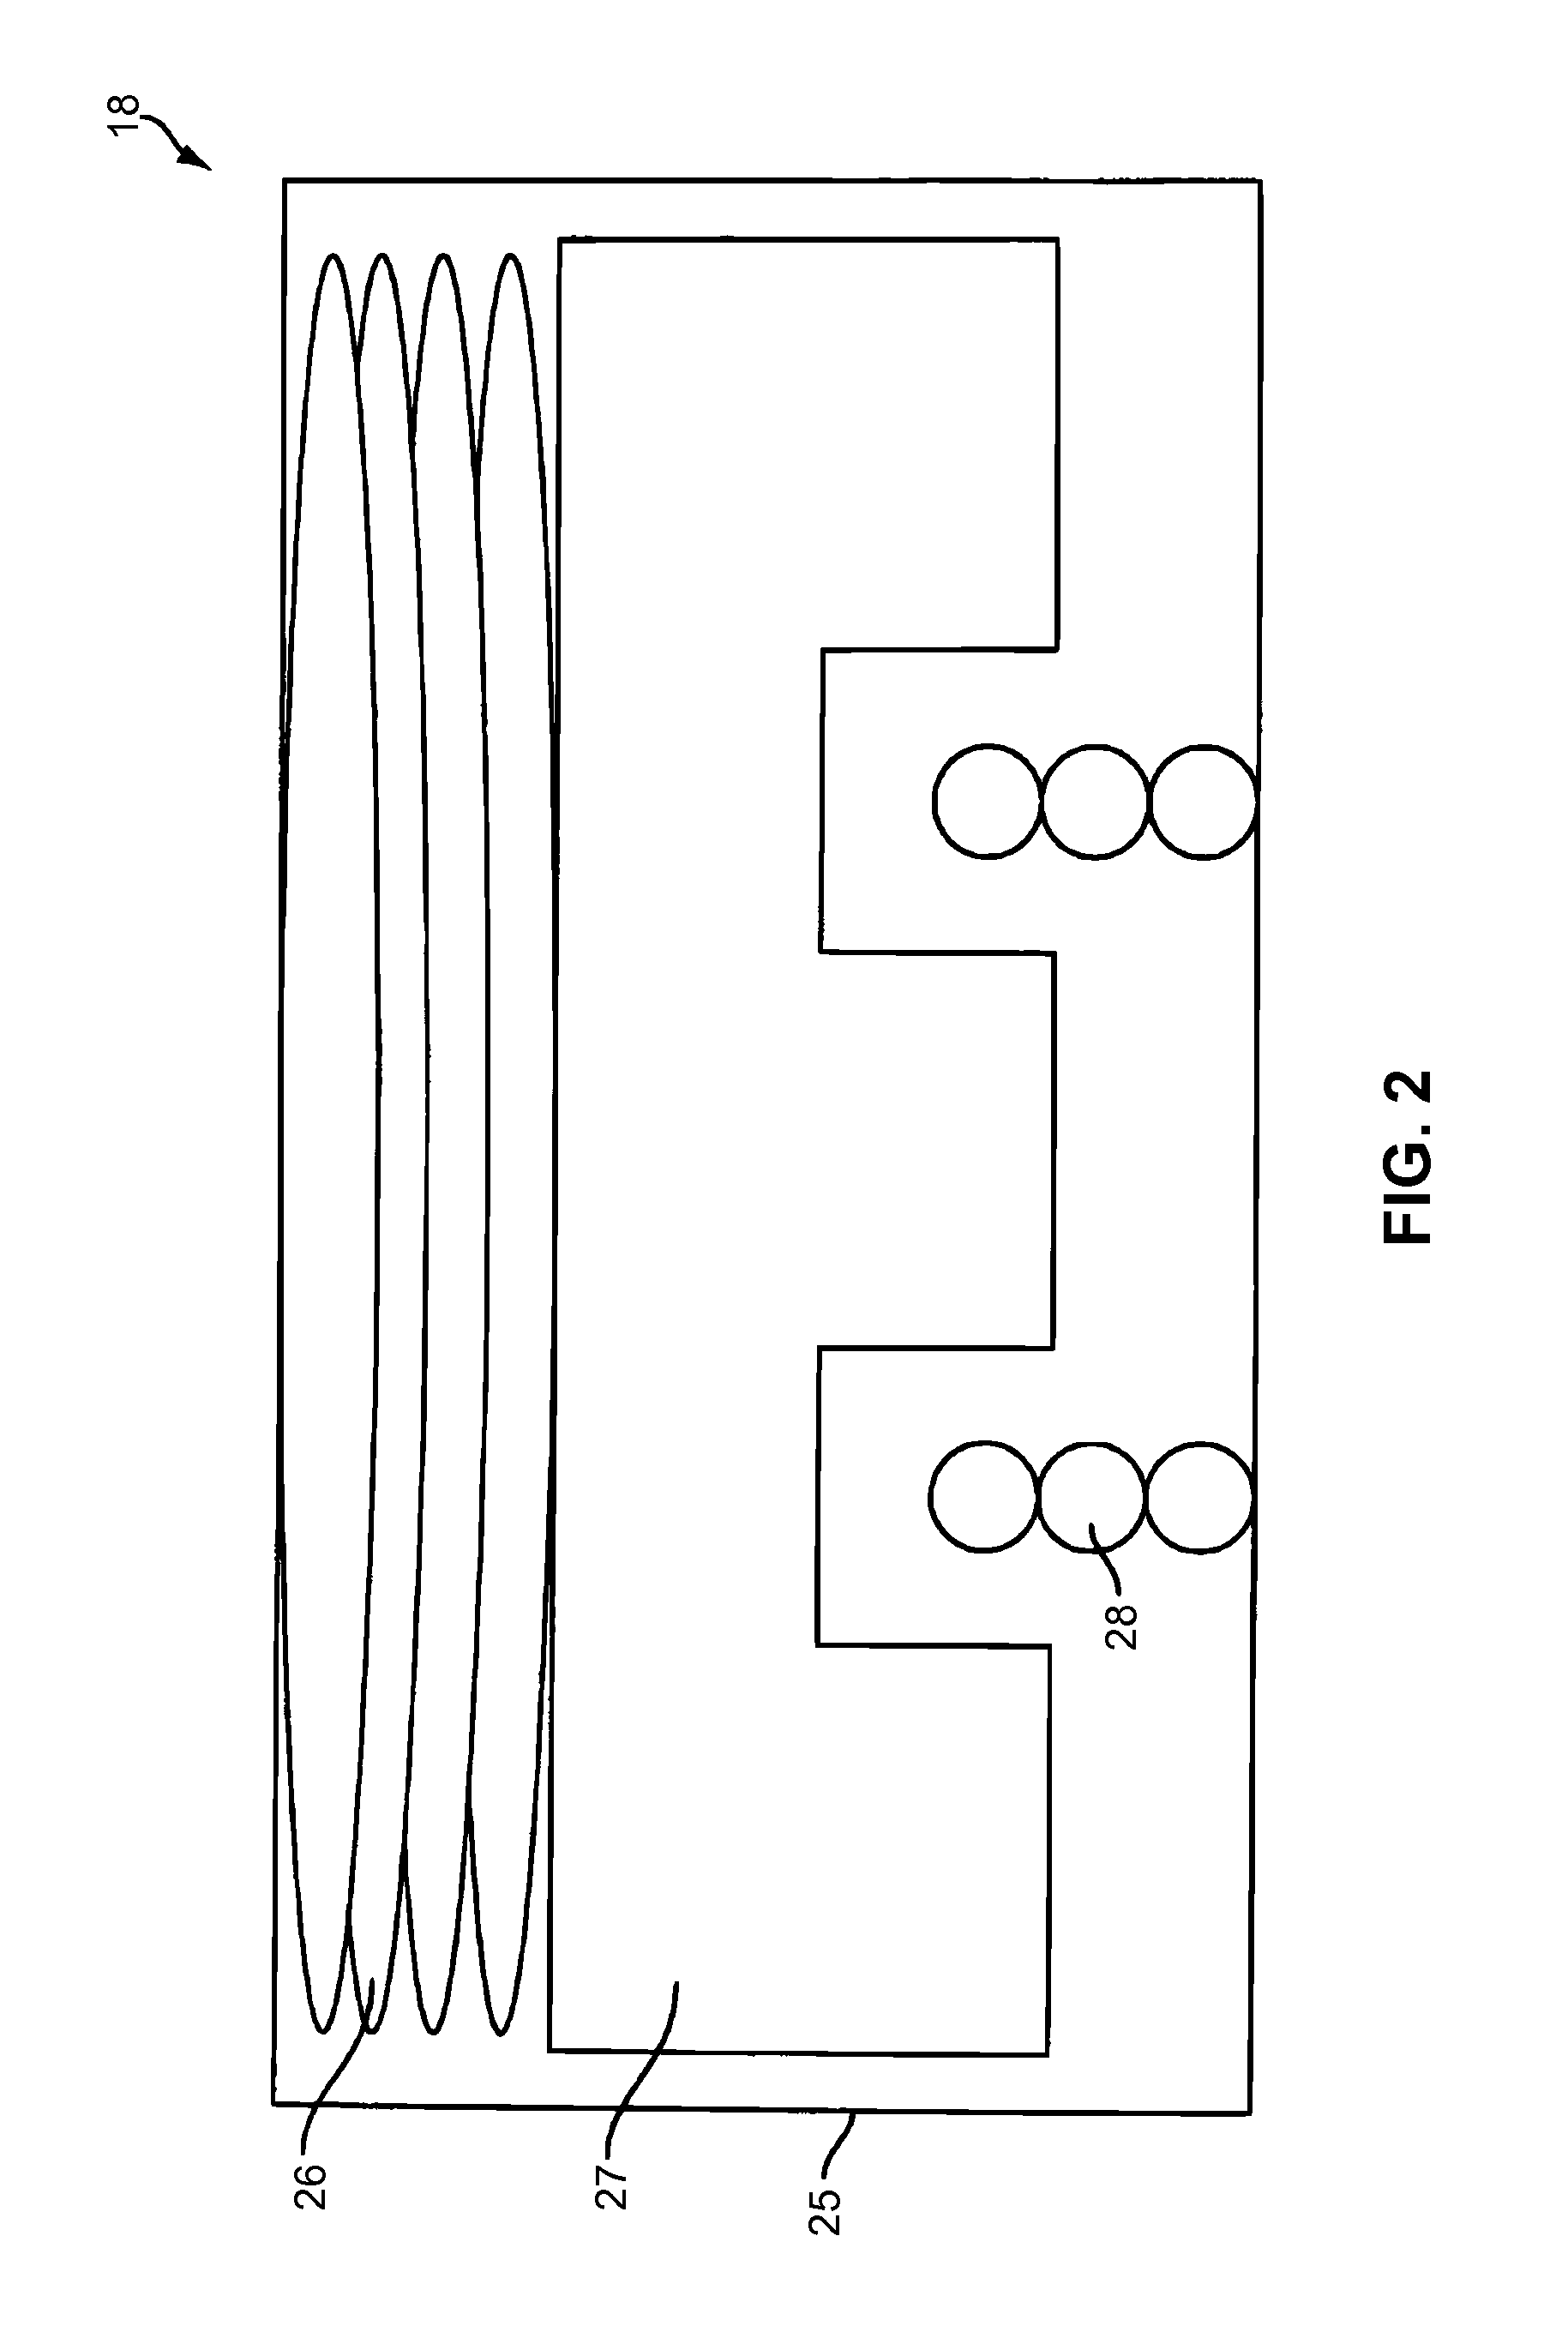 Method and apparatus for producing a dynamic haptic effect